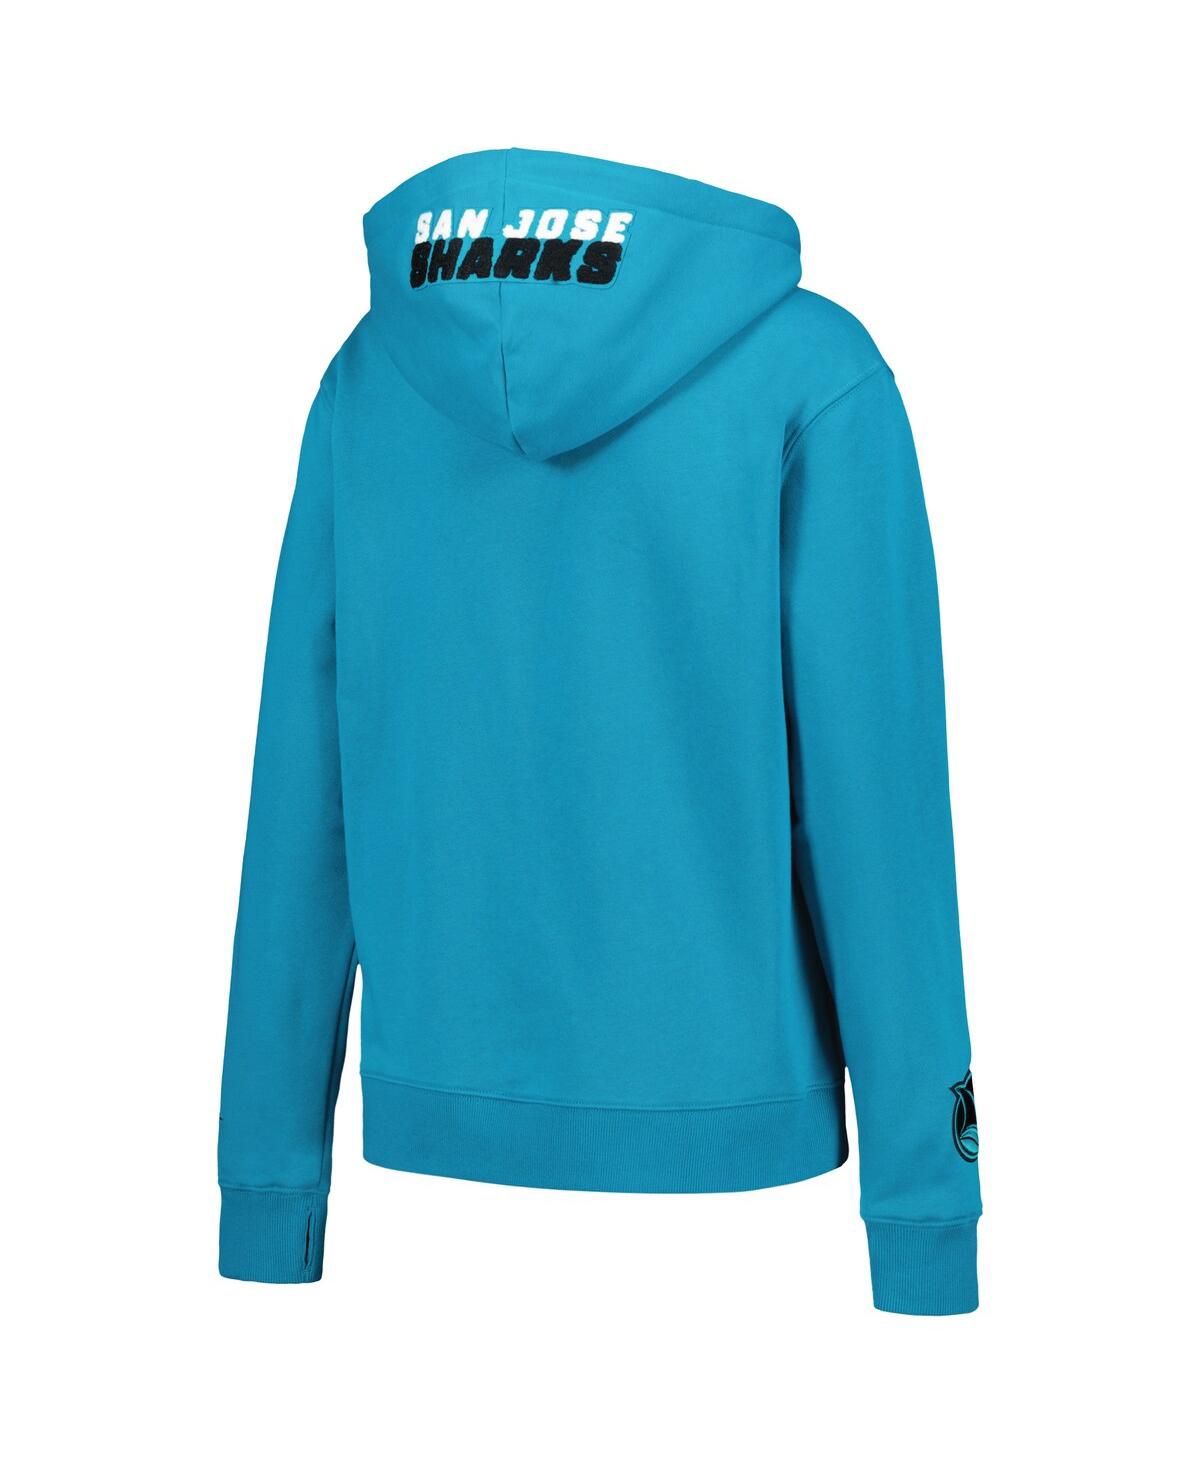 Shop Pro Standard Women's  Teal San Jose Sharks Classic Chenille Pullover Hoodie